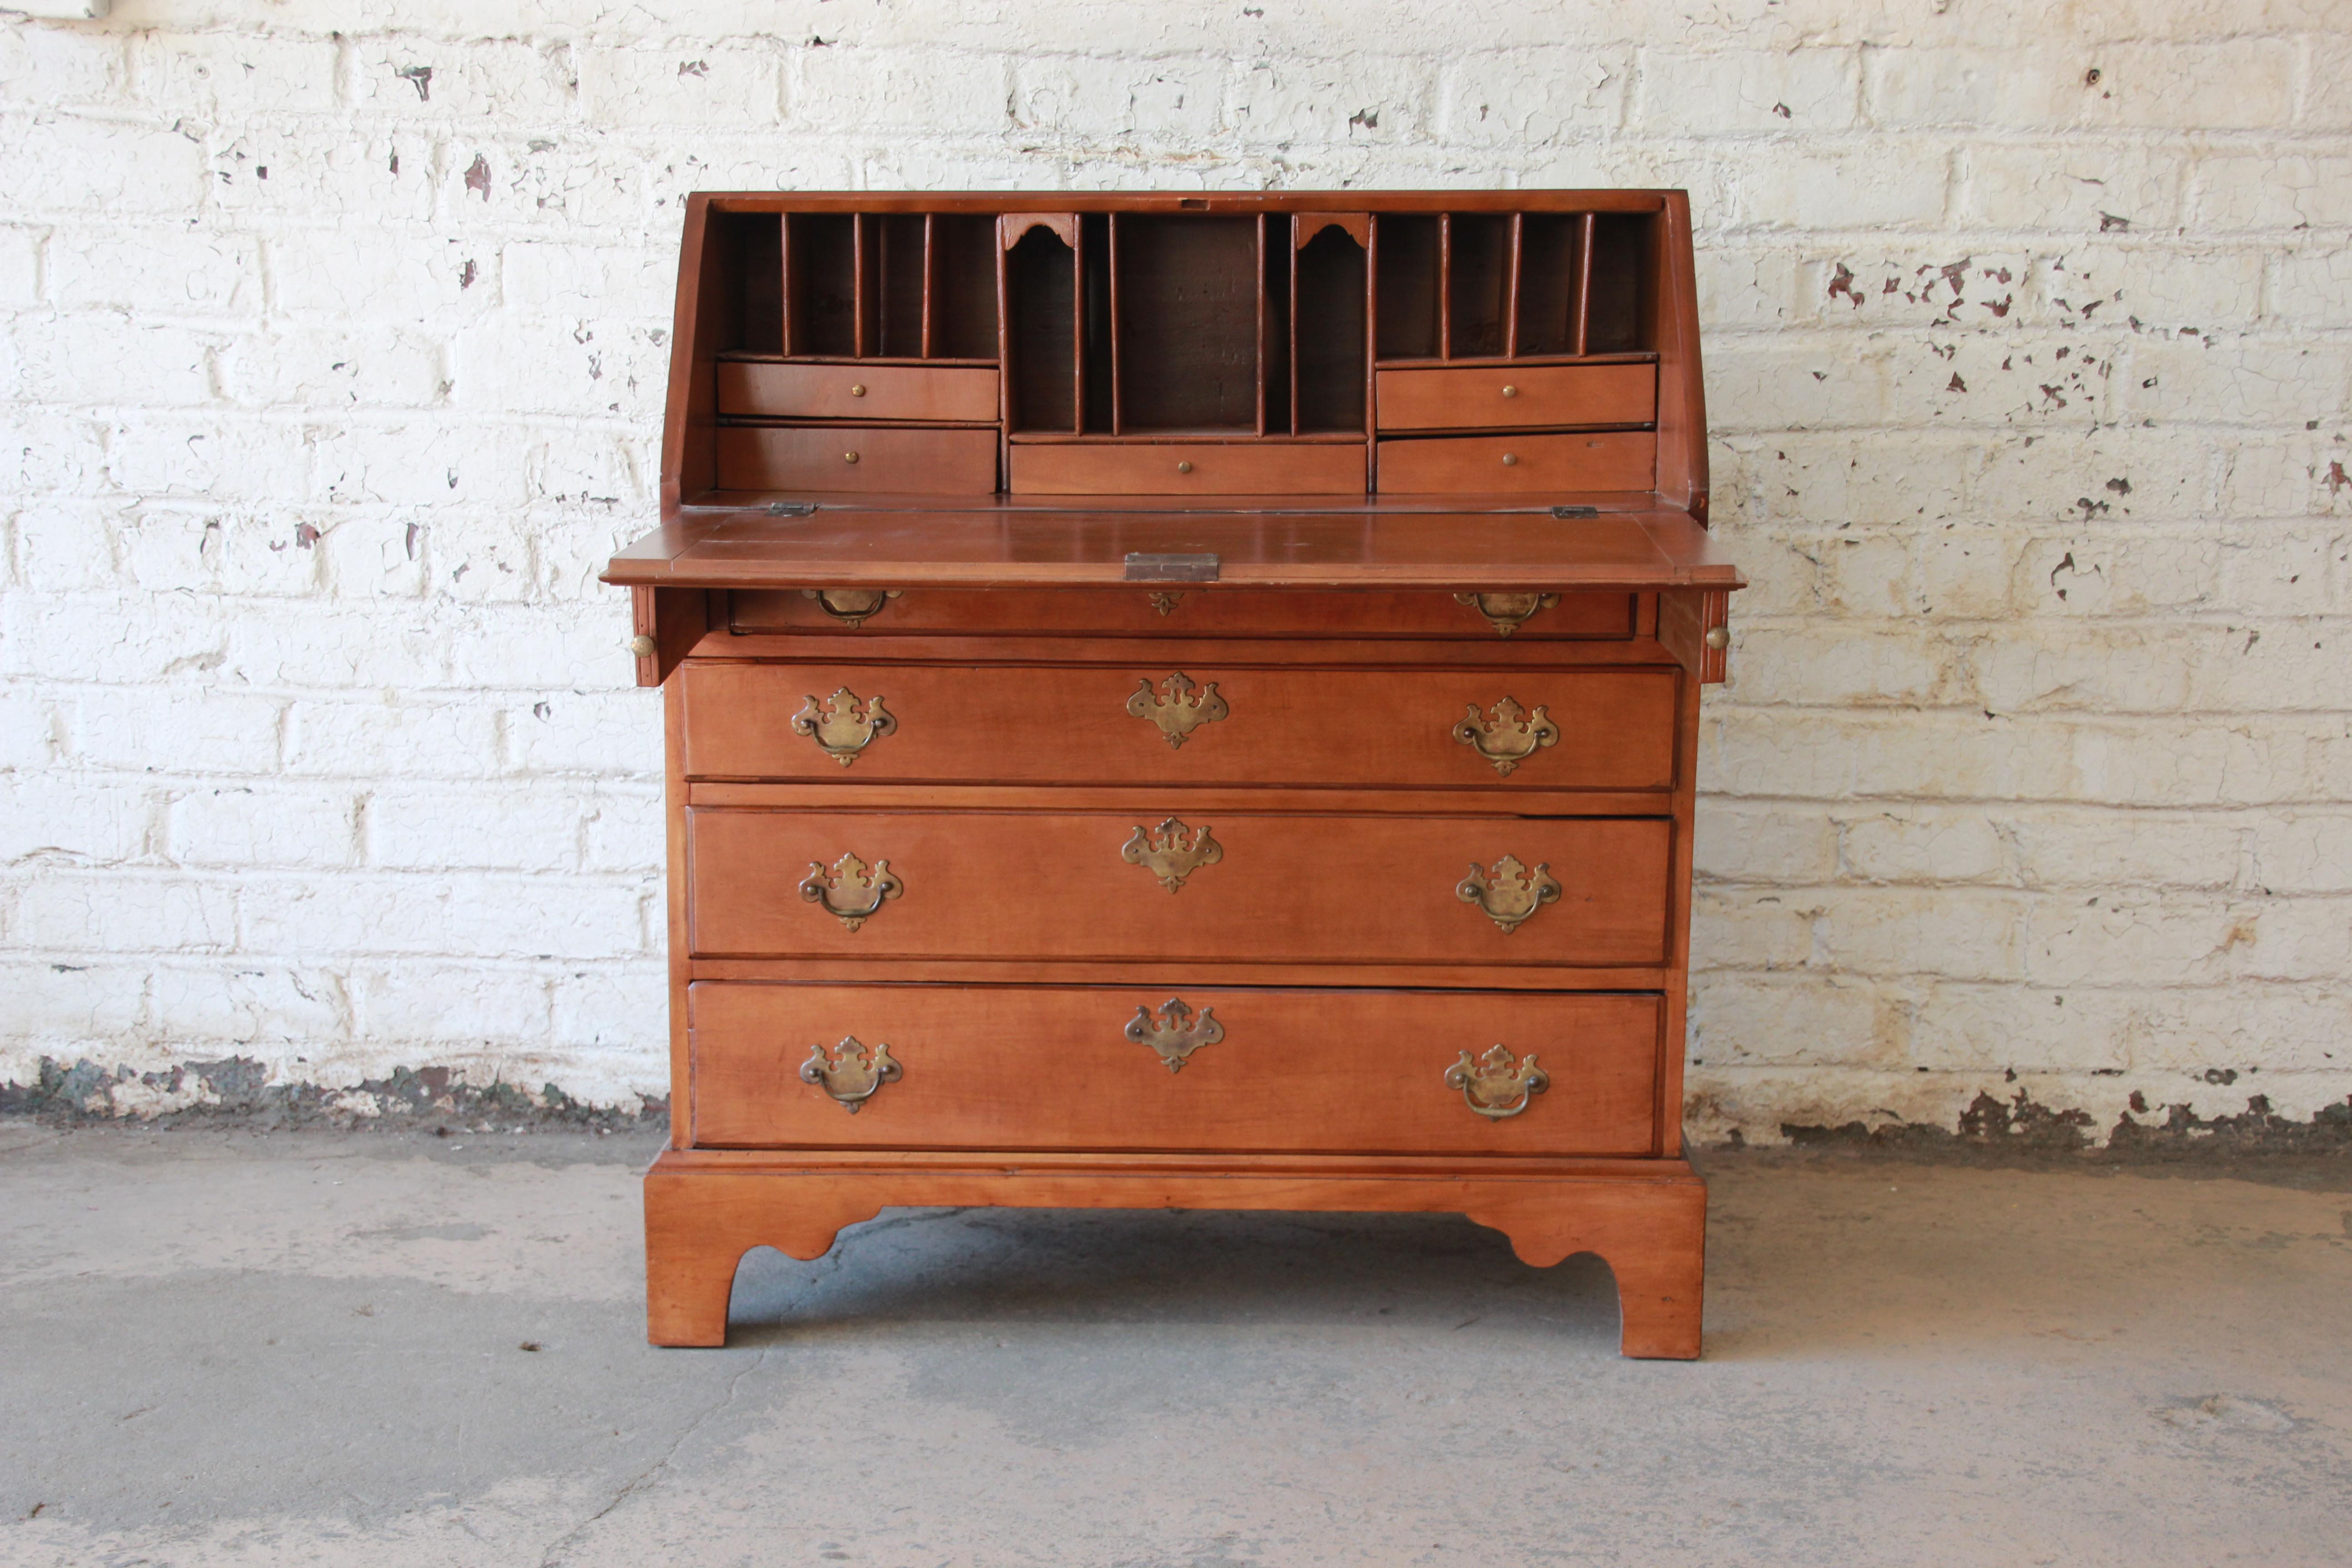 A stunning 18th century early American cherrywood drop-front secretary desk. The desk features solid wood construction, with gorgeous cherry wood grain. It offers ample room for storage, with five drawers and several mail slots behind the drop-front